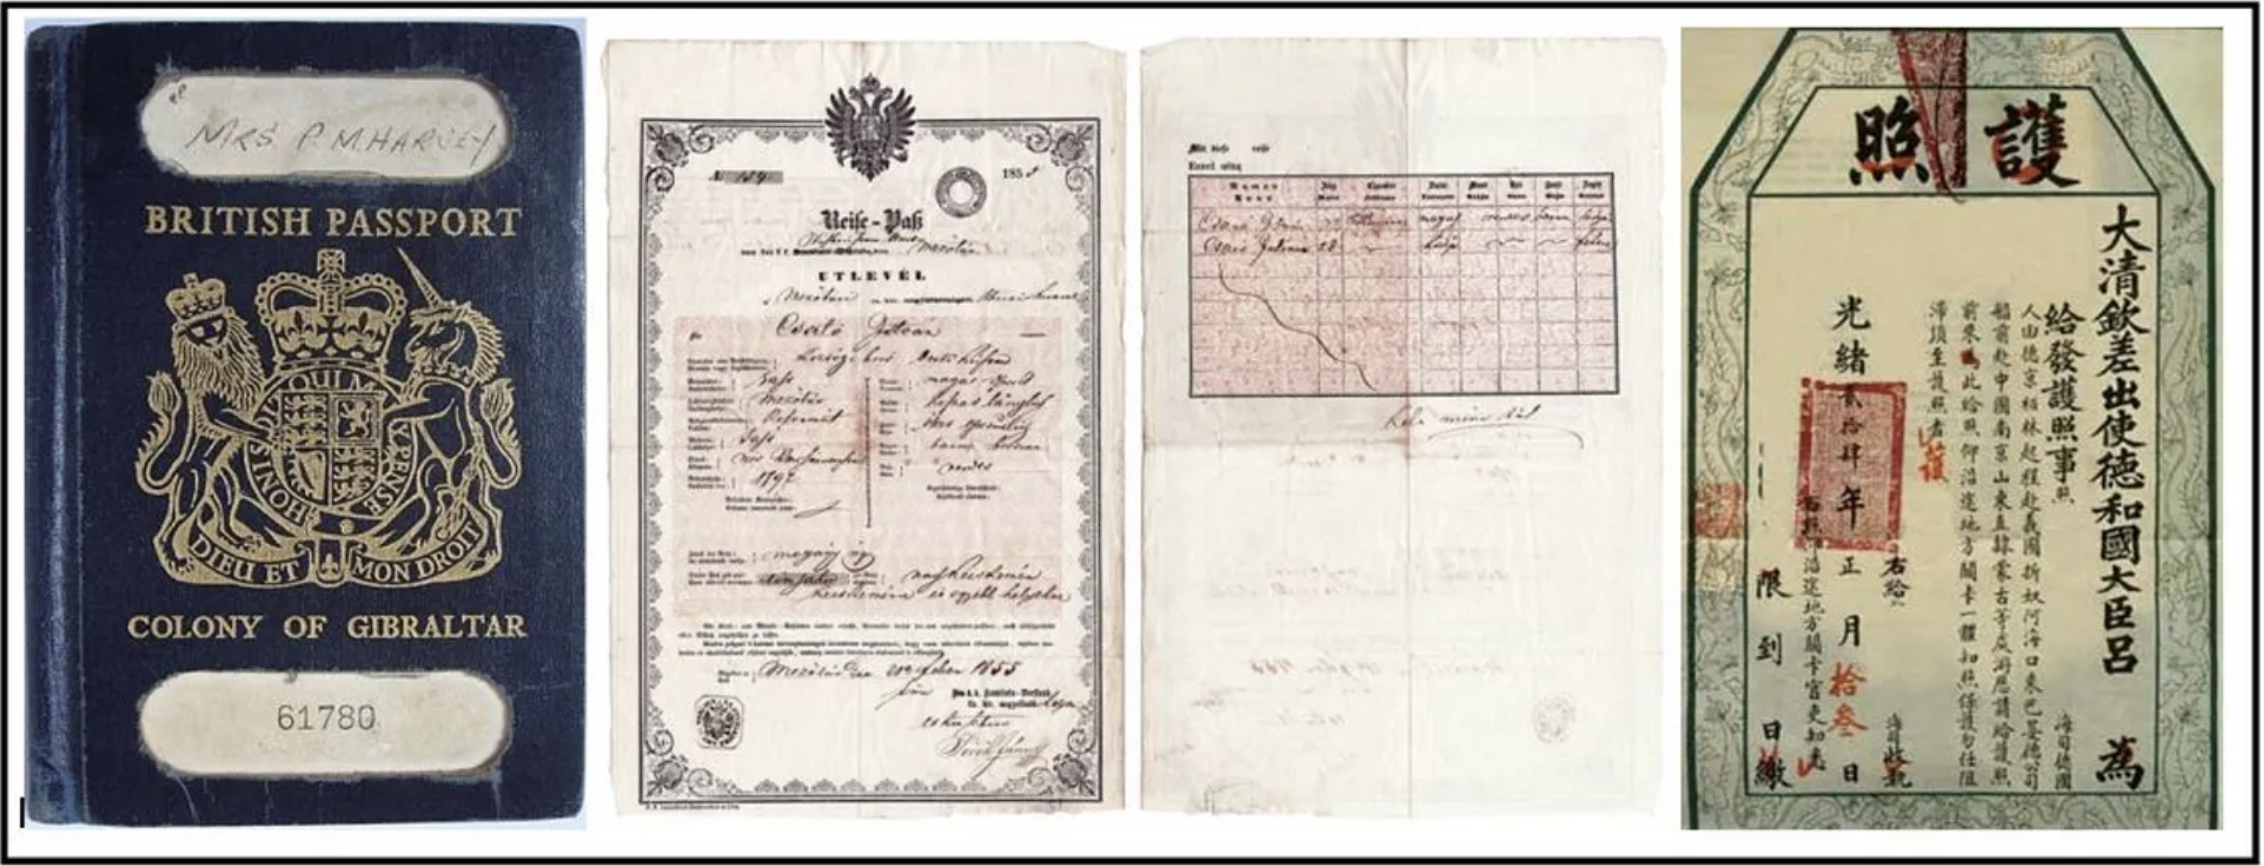 Passports from 20th century Gibraltar, 1855 Hungary, and the Qing Dynasty in 1898. Designs were inconsistent.